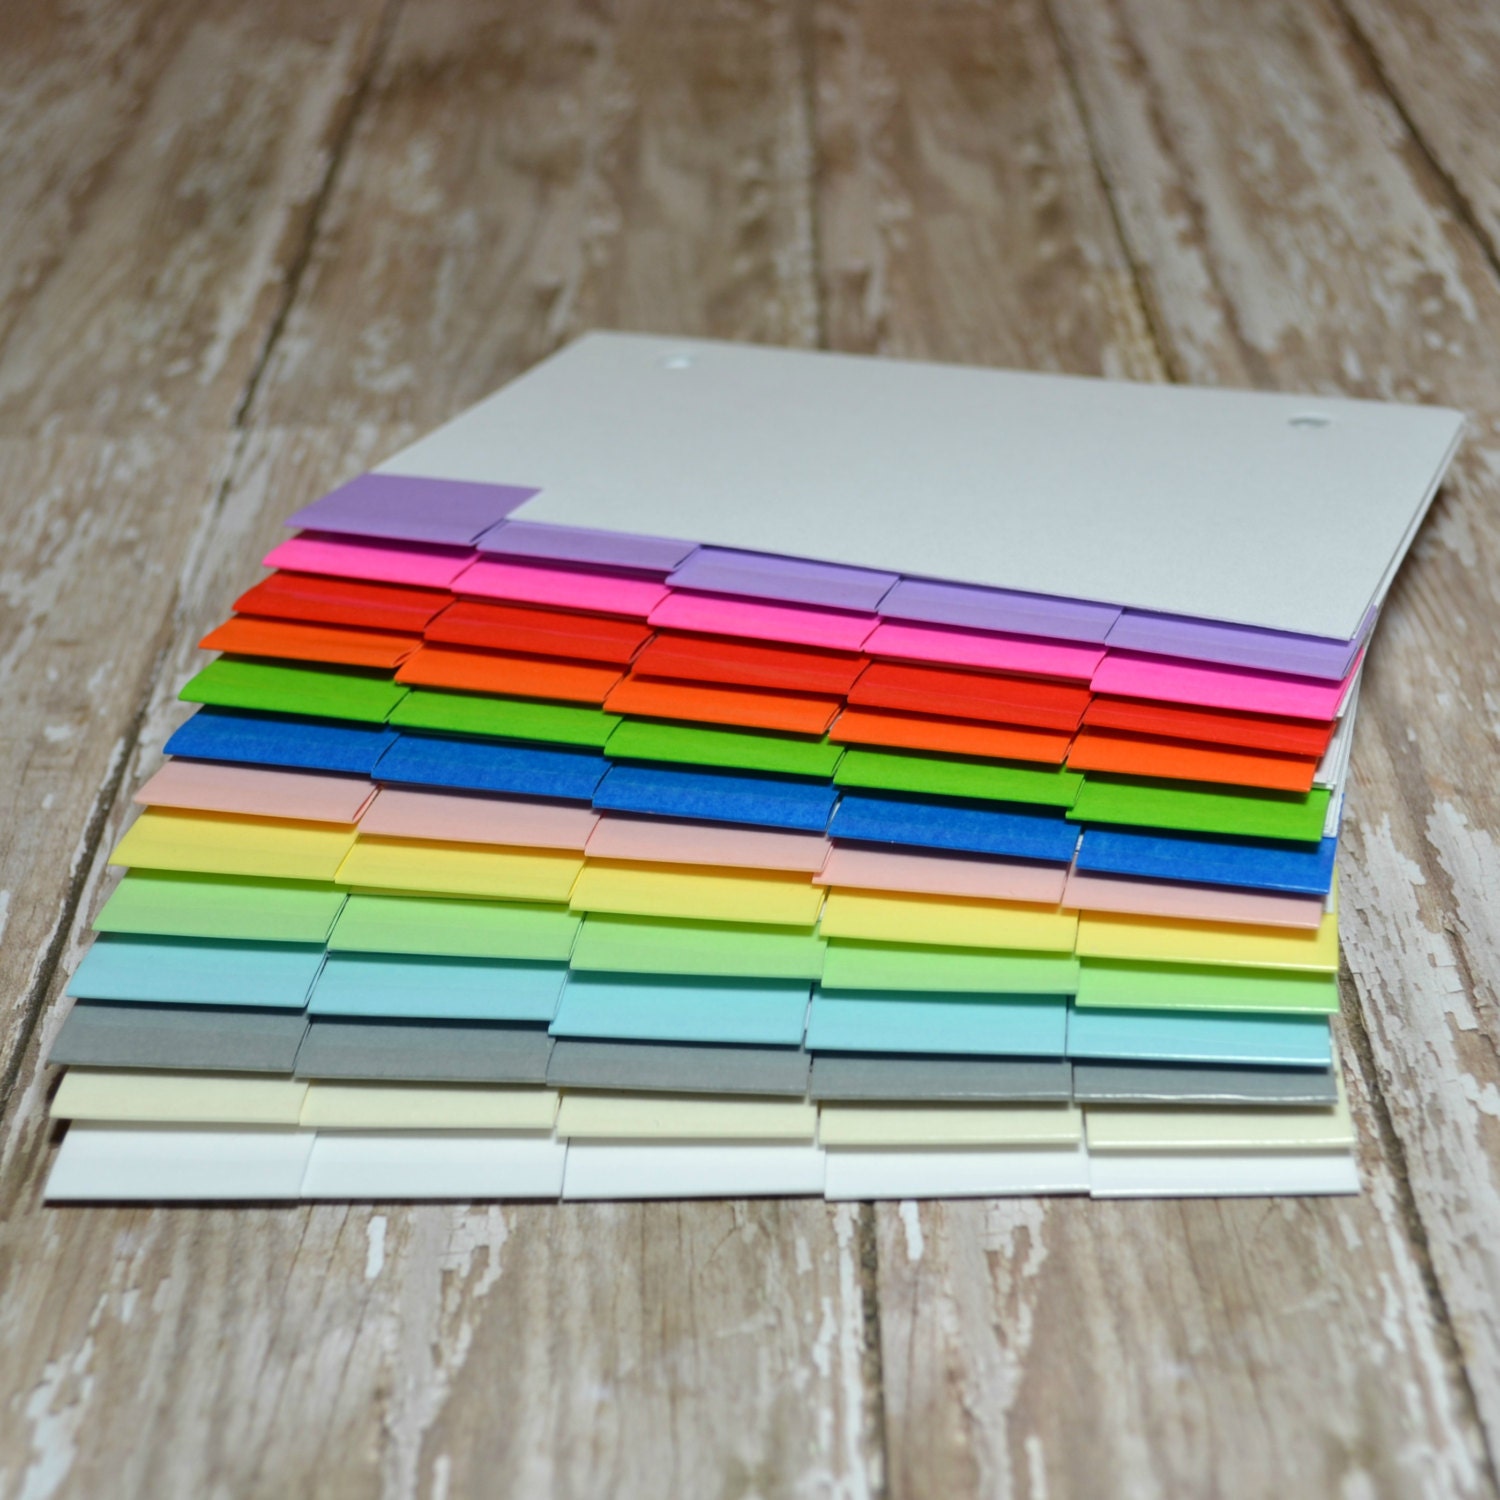 5-tab-divider-set-for-your-index-card-binder-or-recipe-box